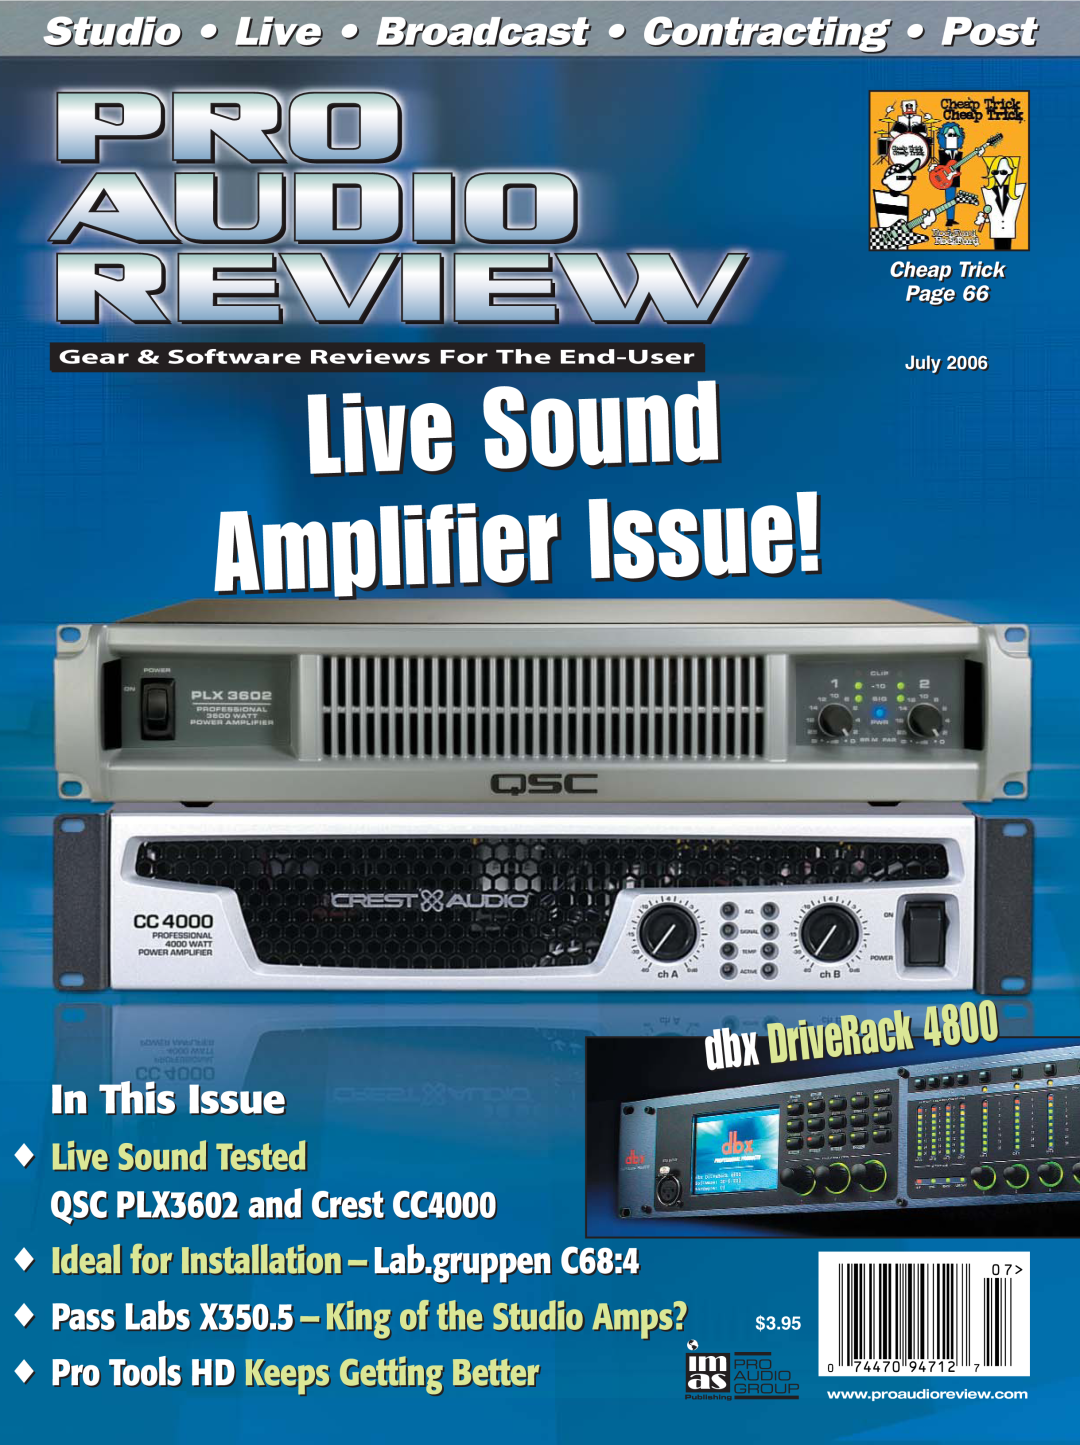 QSC Audio 4800 manual Live Sound, Amplifier Issue, Studio Live Broadcast Contracting Post, In This Issue, dbx DriveRack 